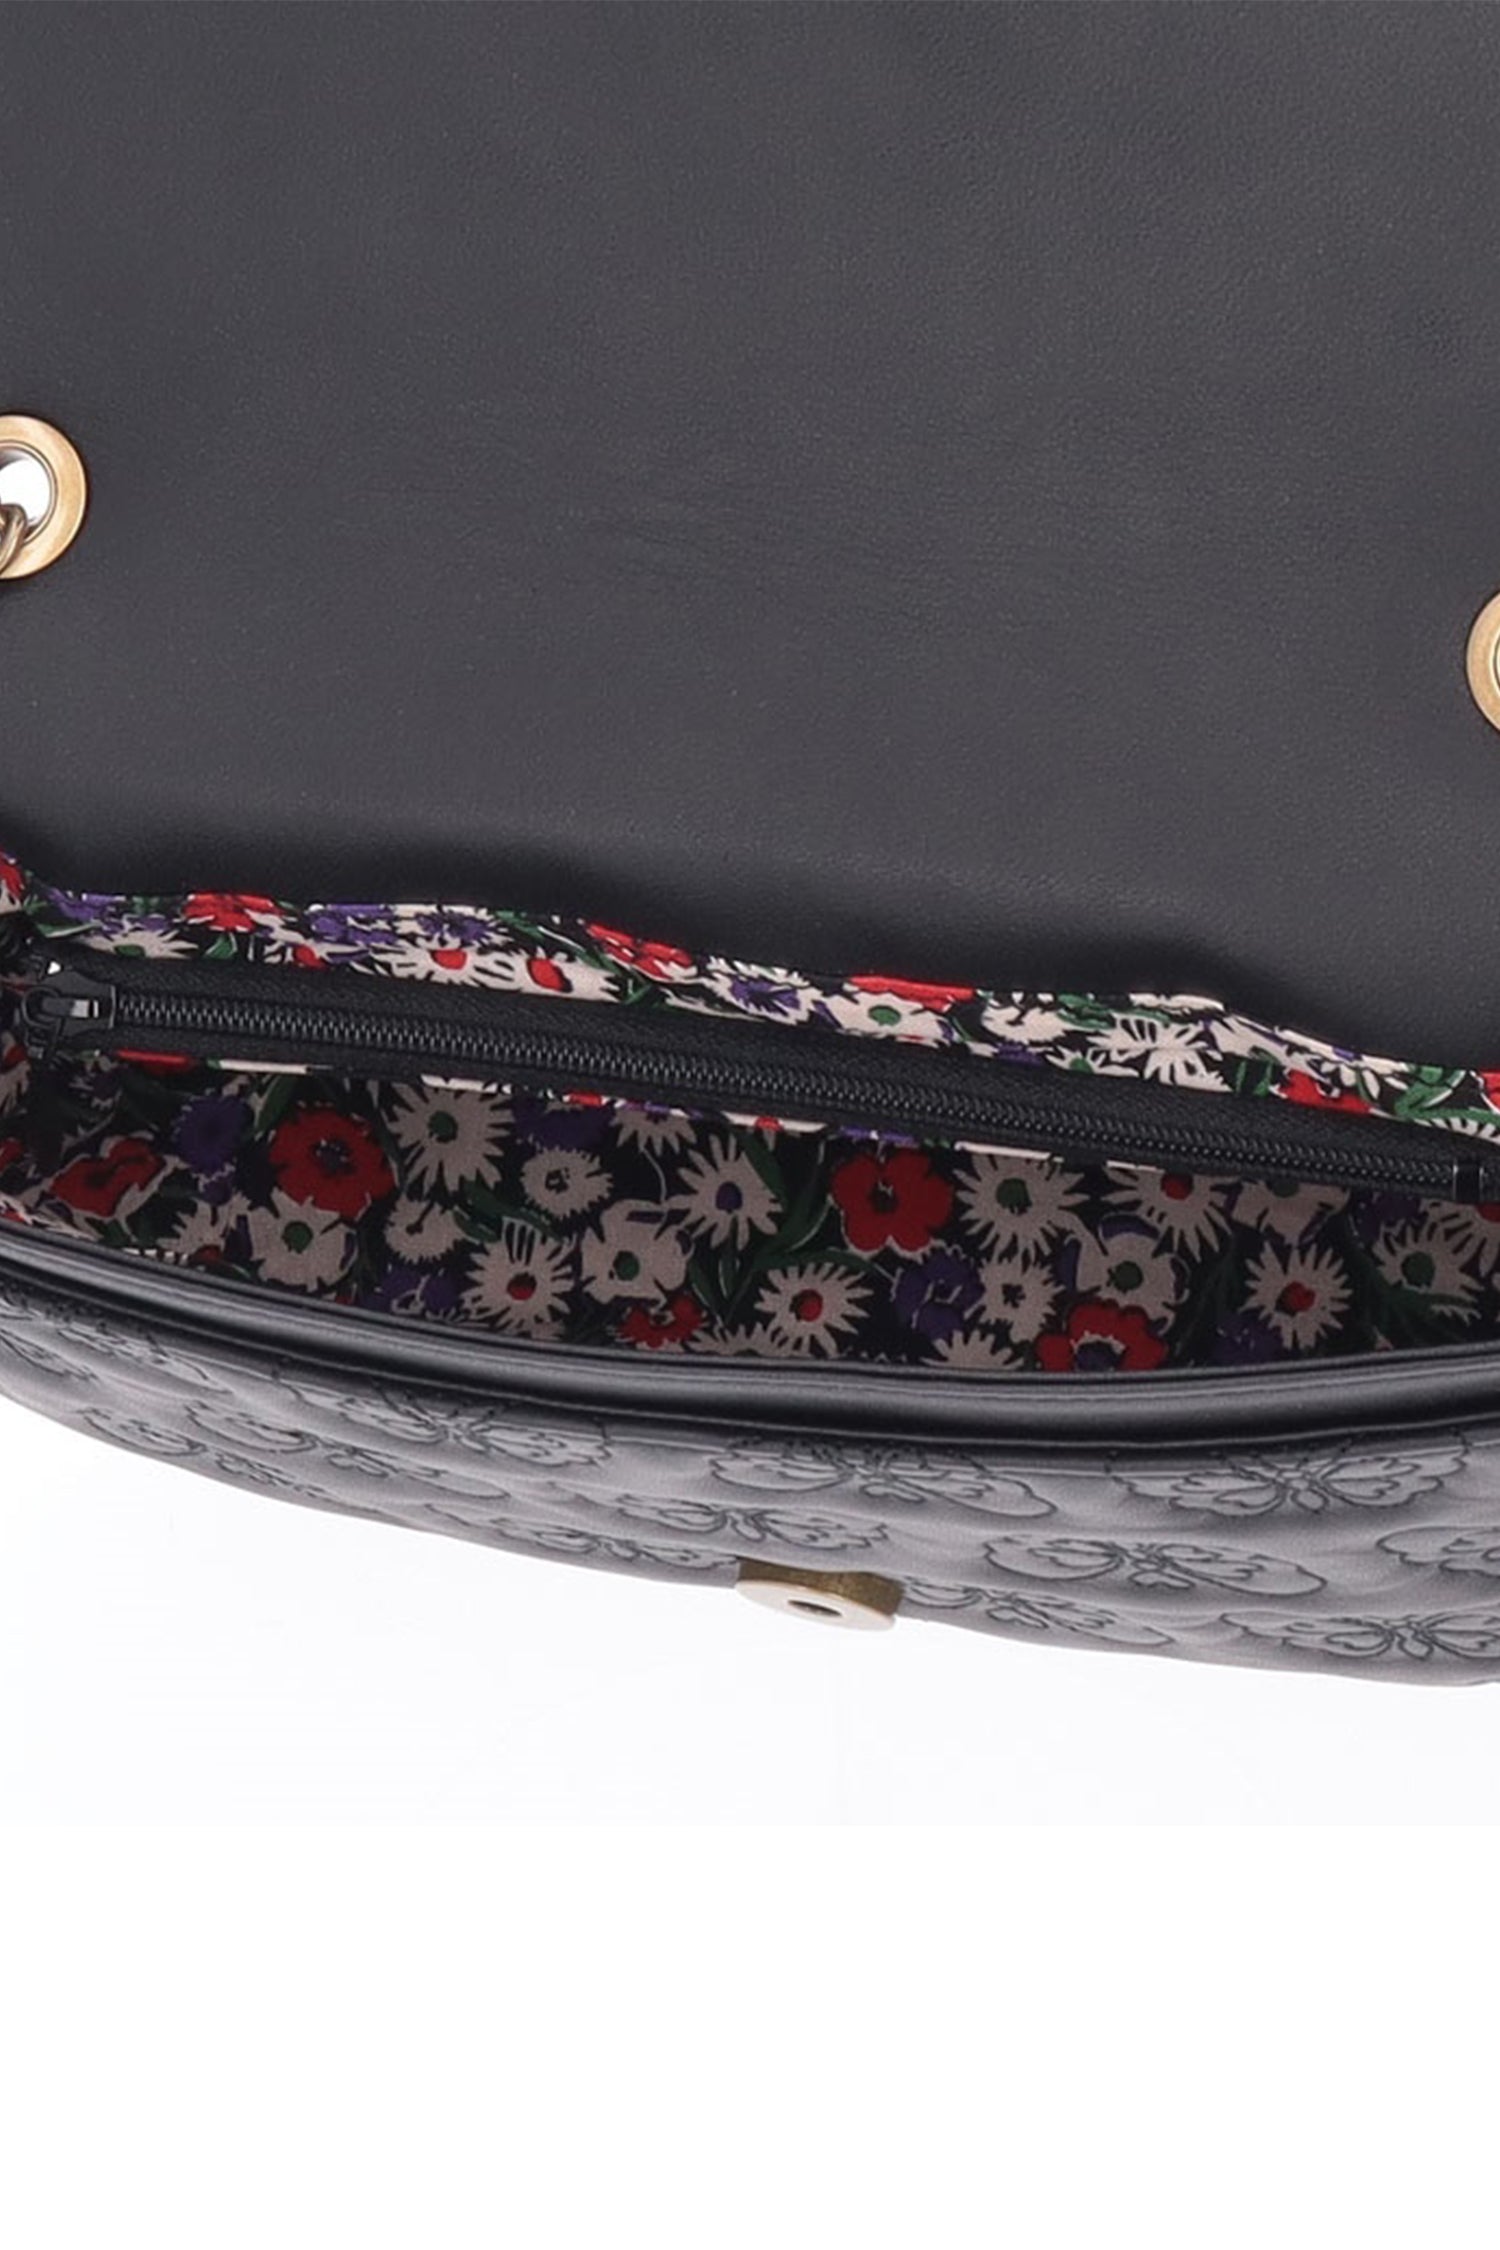 Floral fabric in a main compartment, 1 zipper pocket, 2-open pocket with 2 slots for extra storage